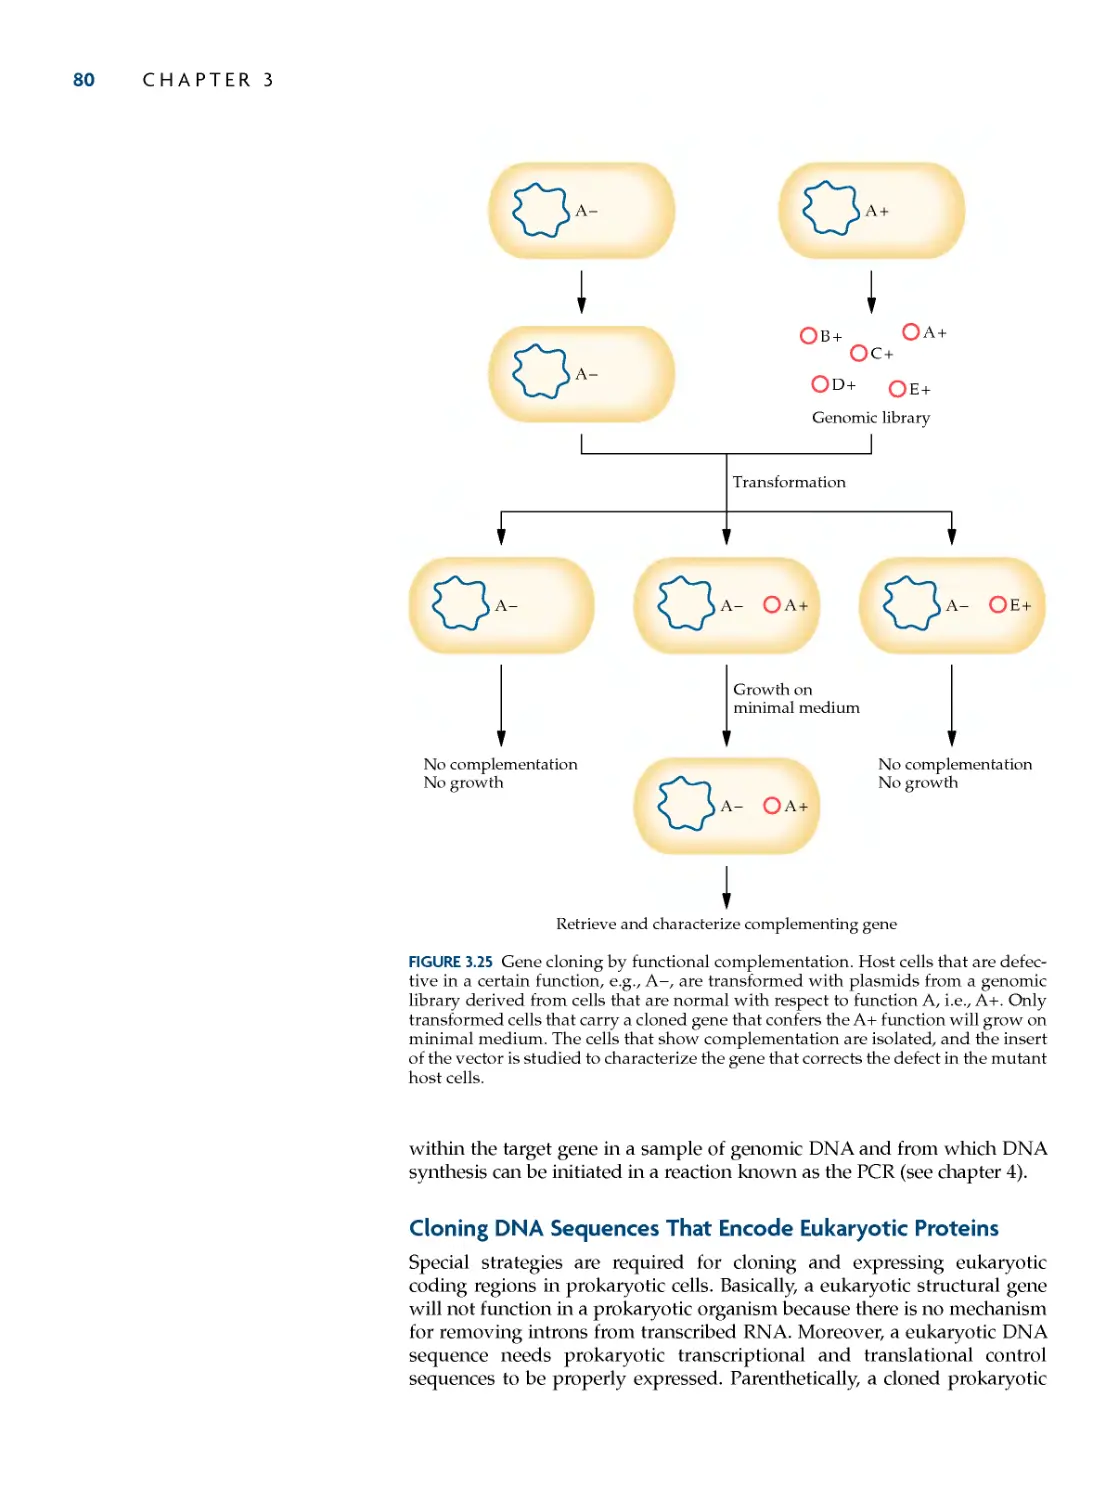 Cloning DNA Sequences that Encode Eukaryotic Proteins